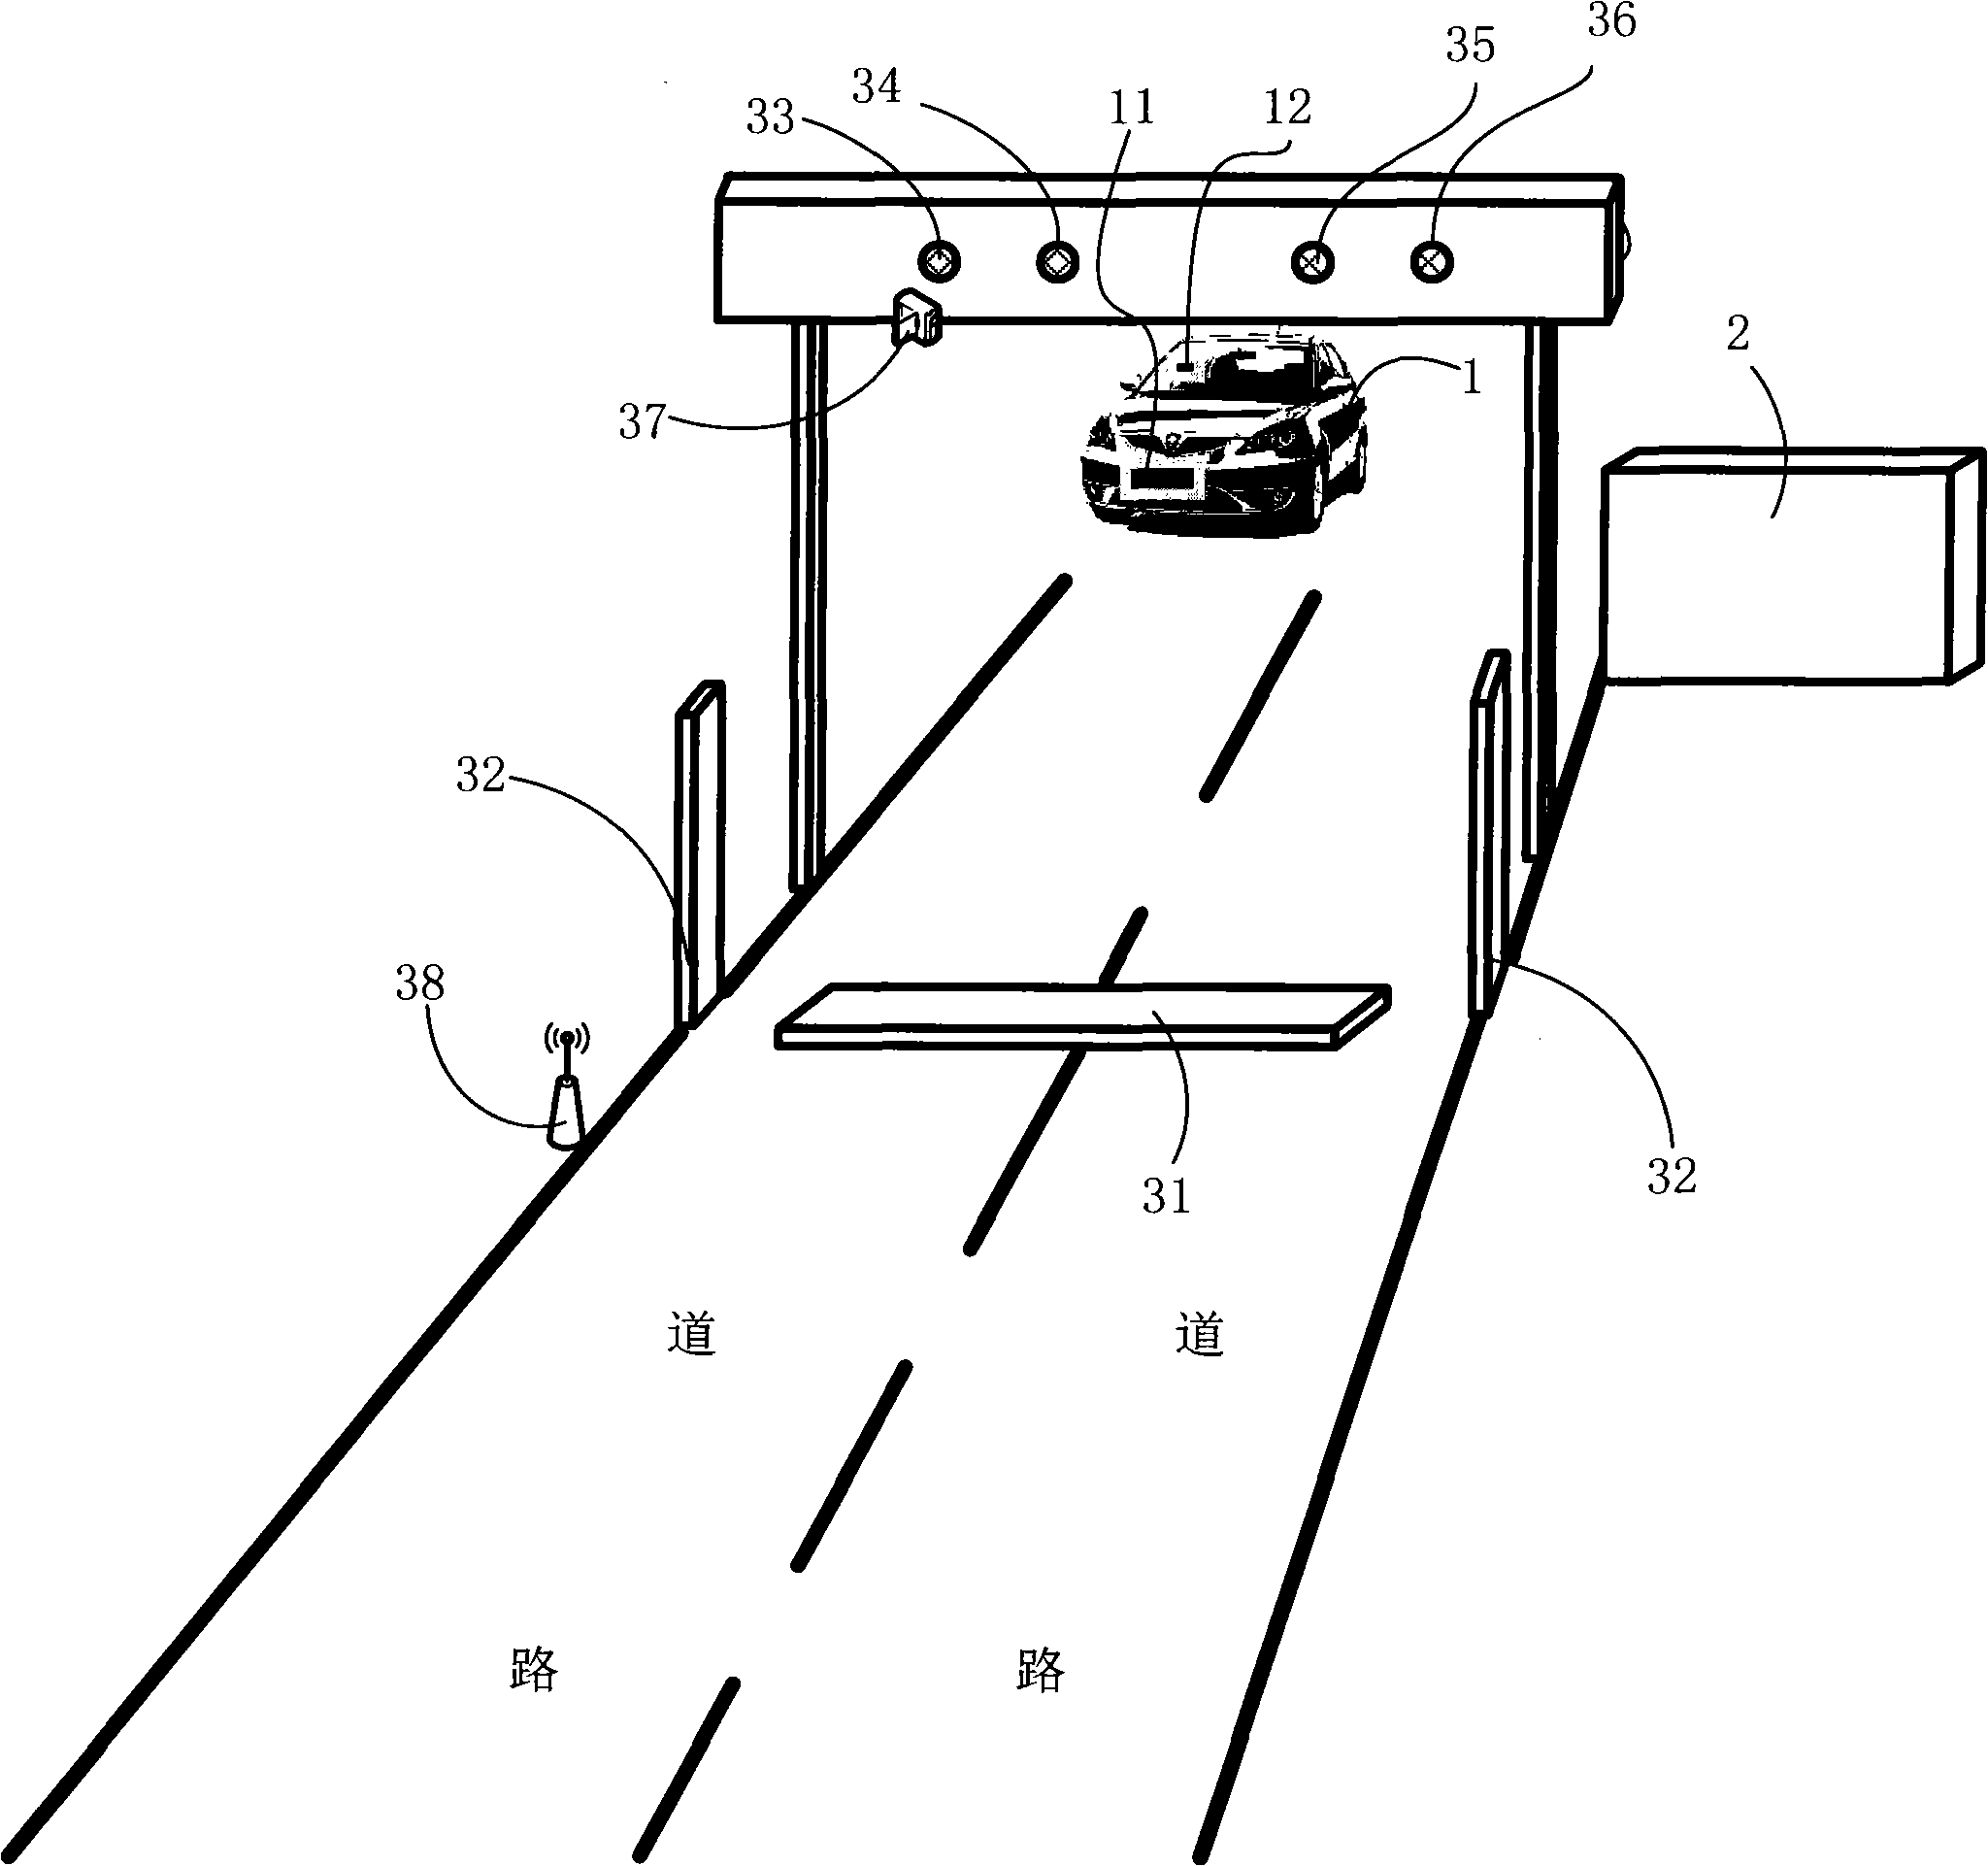 Road traffic detection system